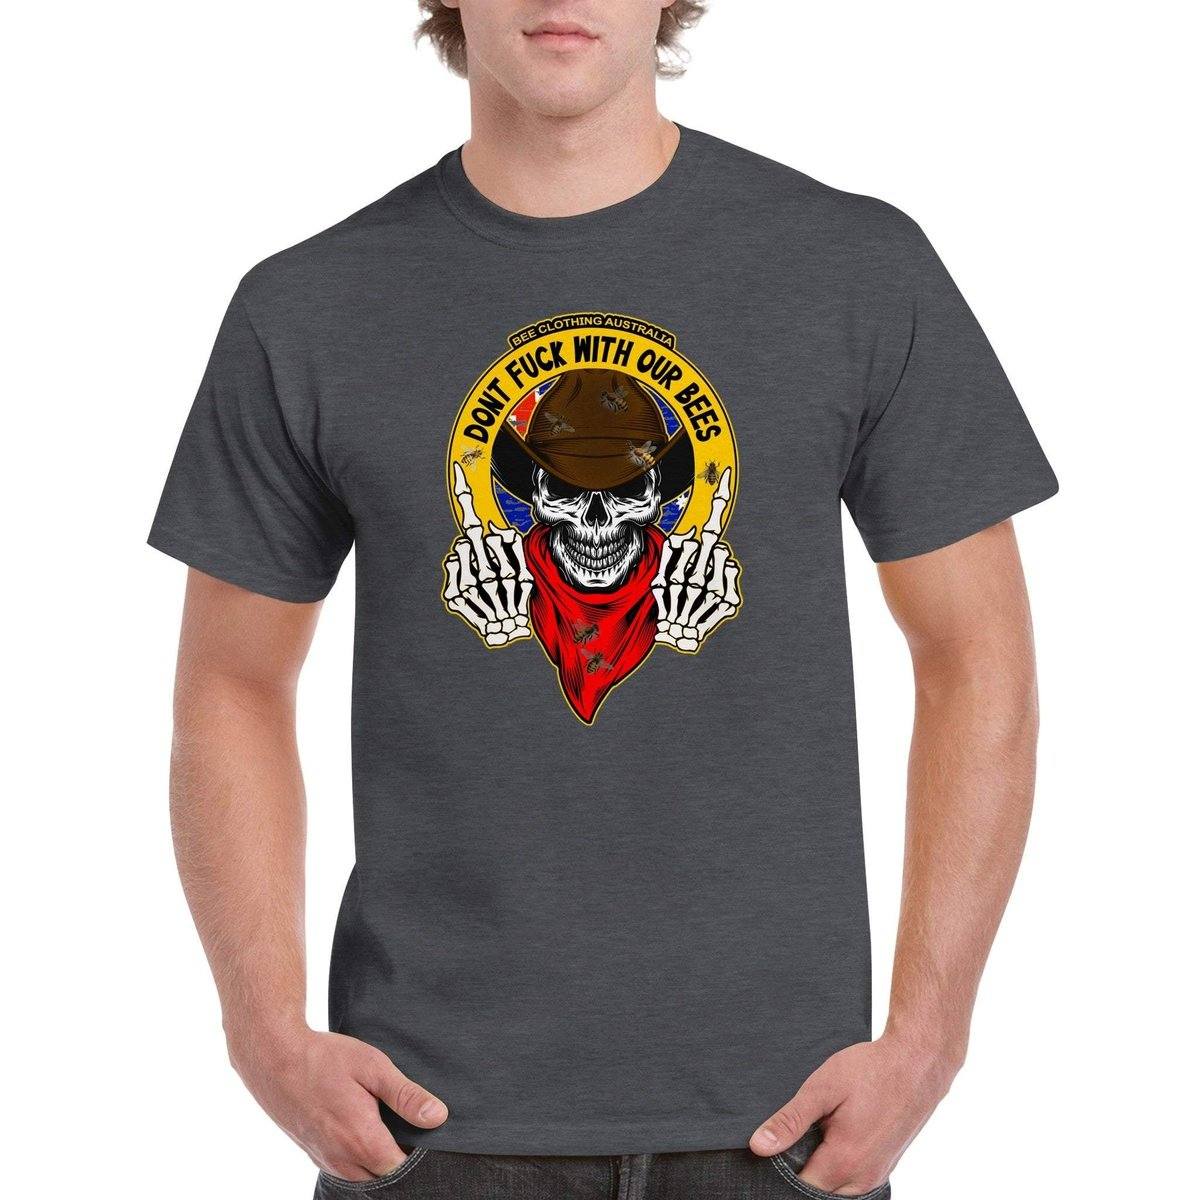 Dont Fuck With Our Bees T-Shirt - beekeeper Tshirt - Unisex Crewneck T-shirt Adults T-Shirts Unisex Dark Heather / S Bee Clothing Australia